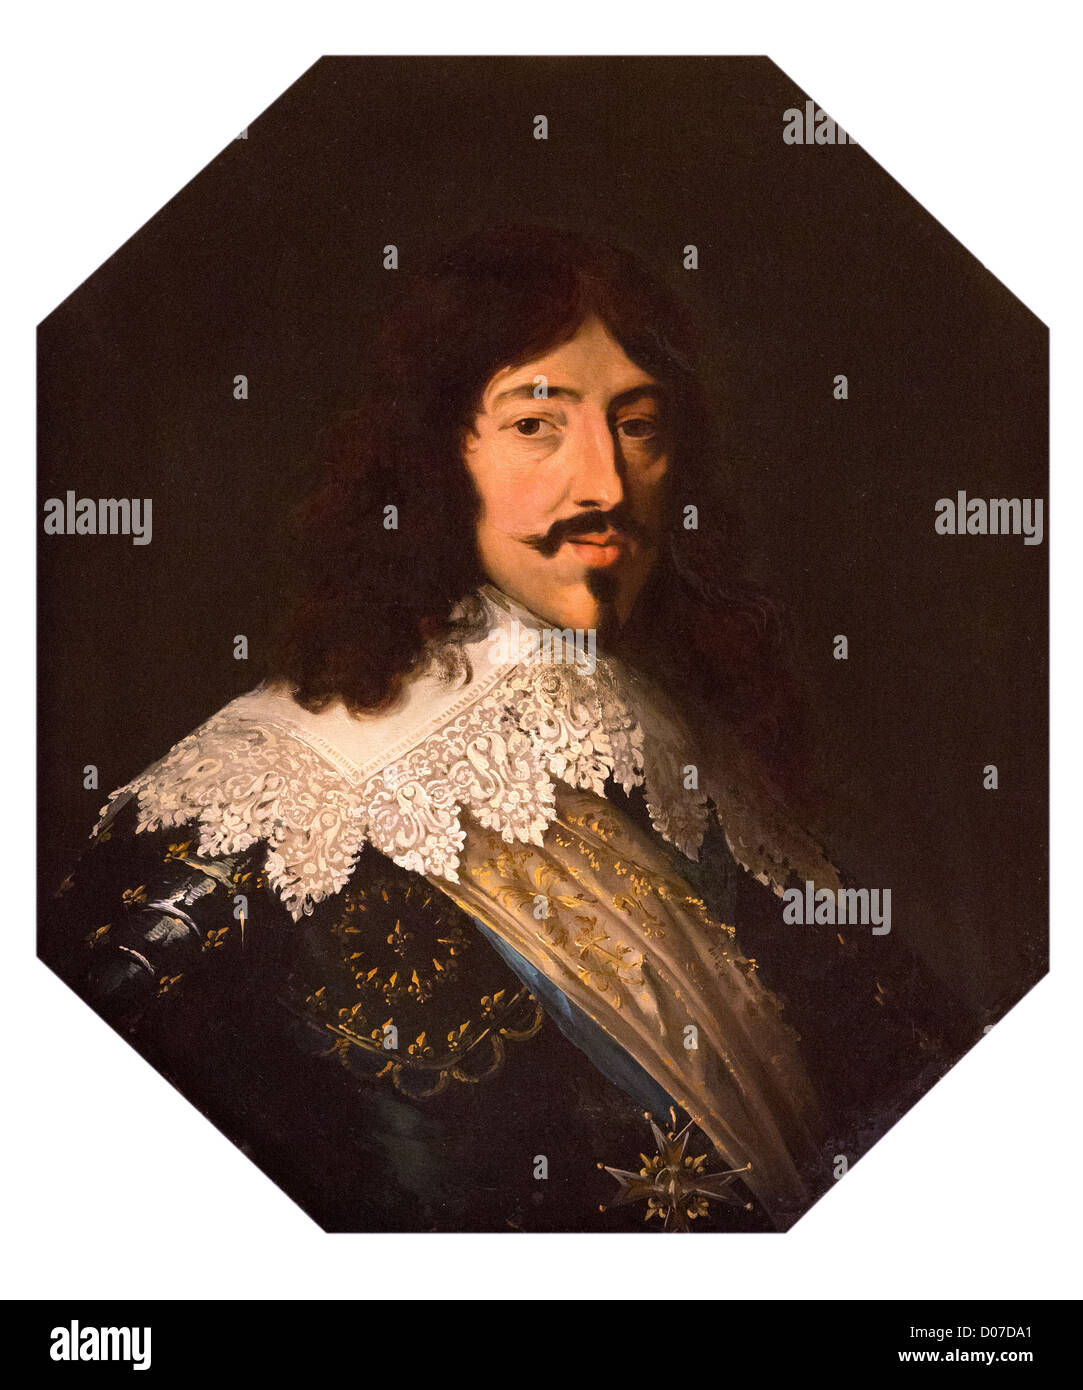 24 Portraits of louis xiii of france Images: PICRYL - Public